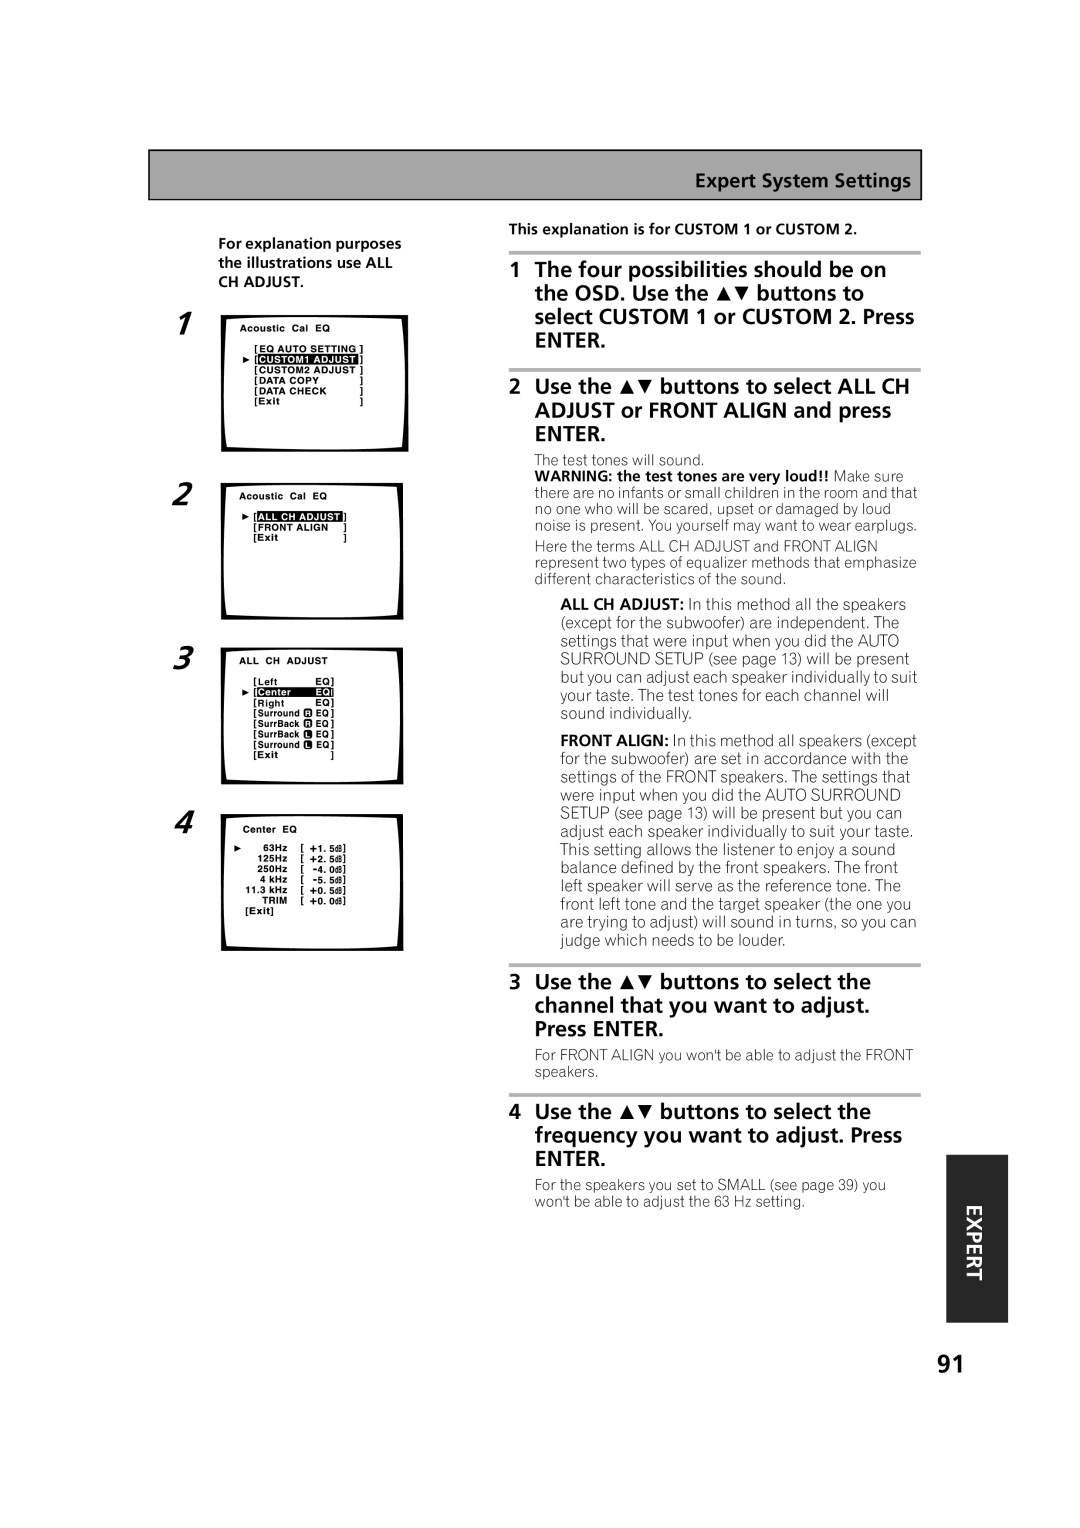 Pioneer VSX-53TX manual 1 2, Expert System Settings, For explanation purposes, the illustrations use ALL CH ADJUST 